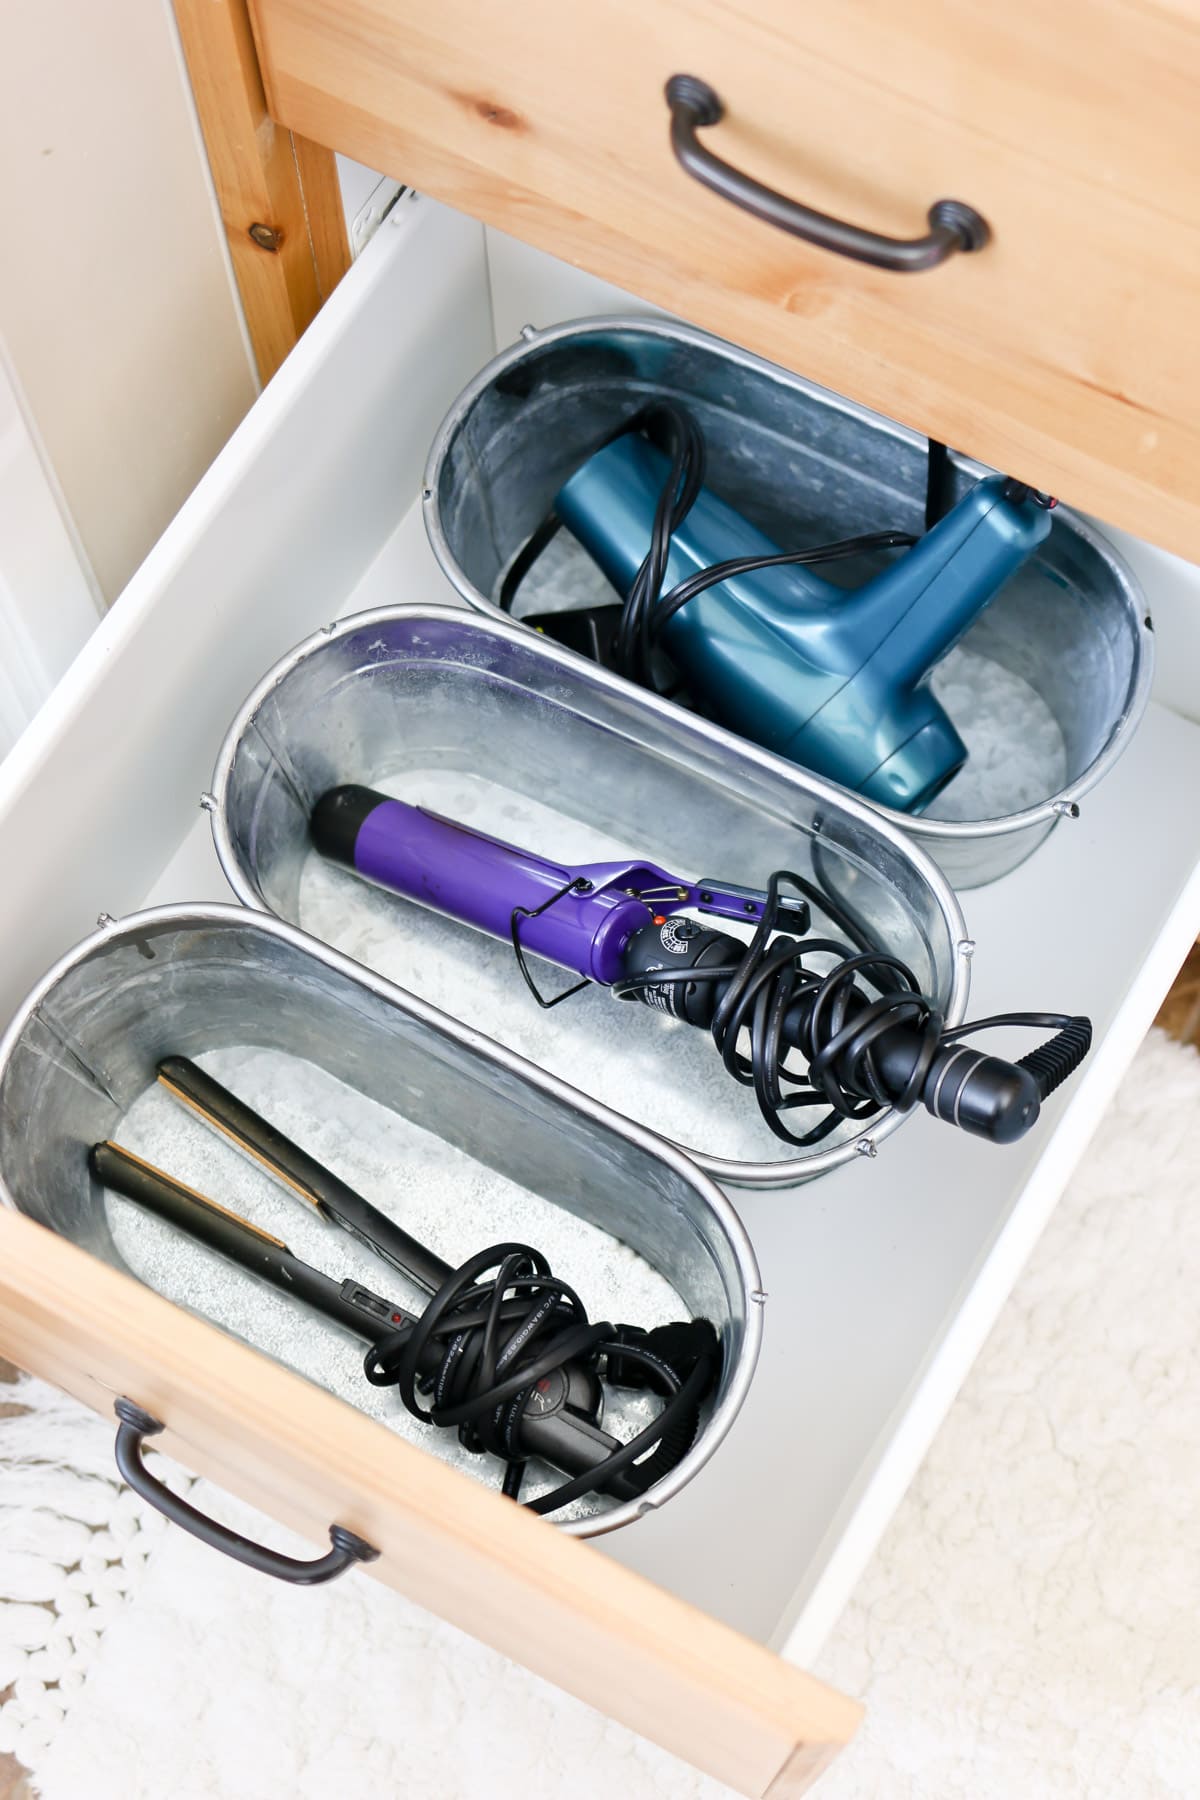 curling iron and blow dryer organization